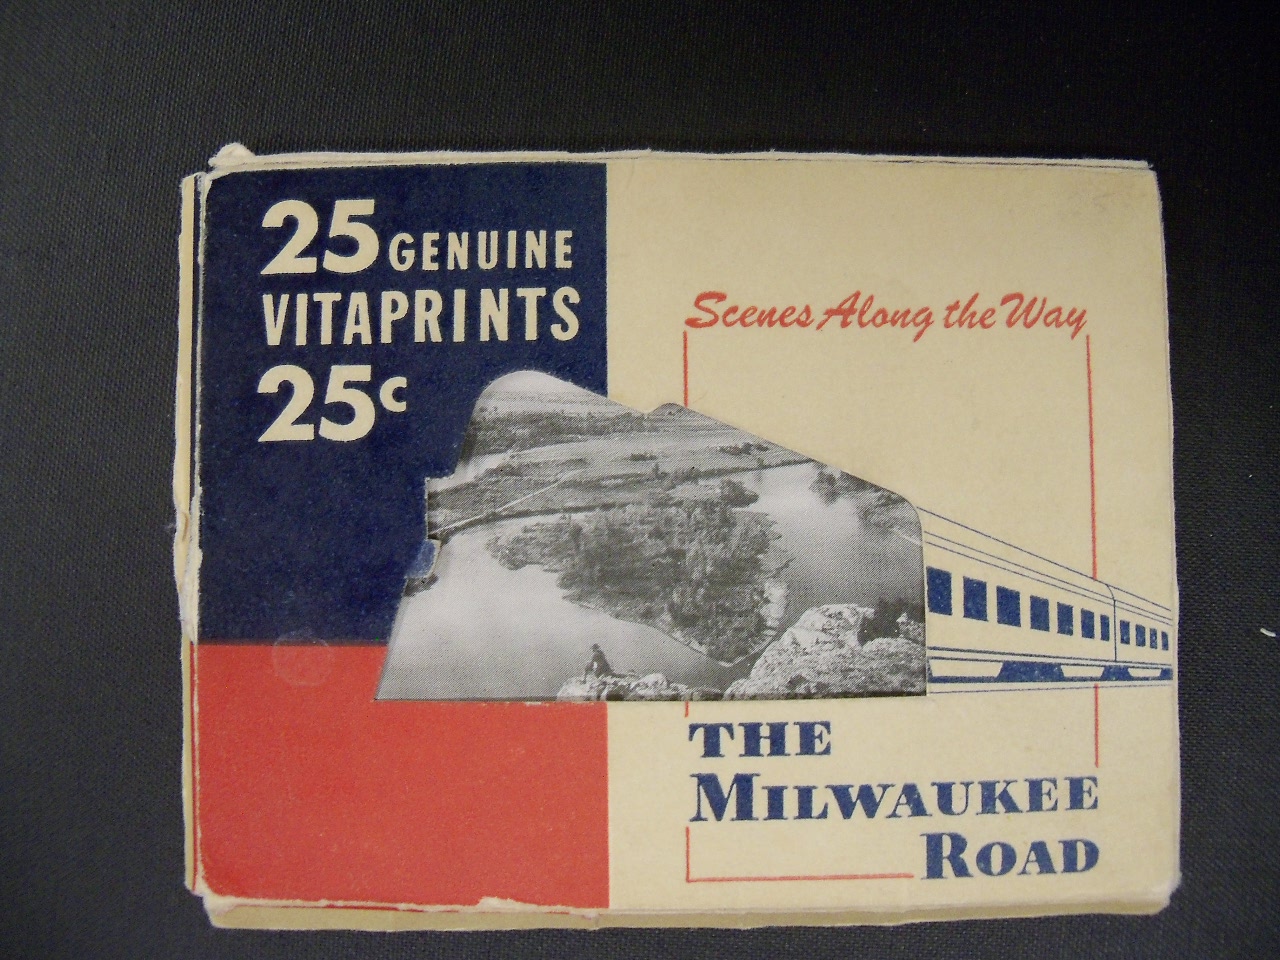 Scenes from the Milwaukee Road